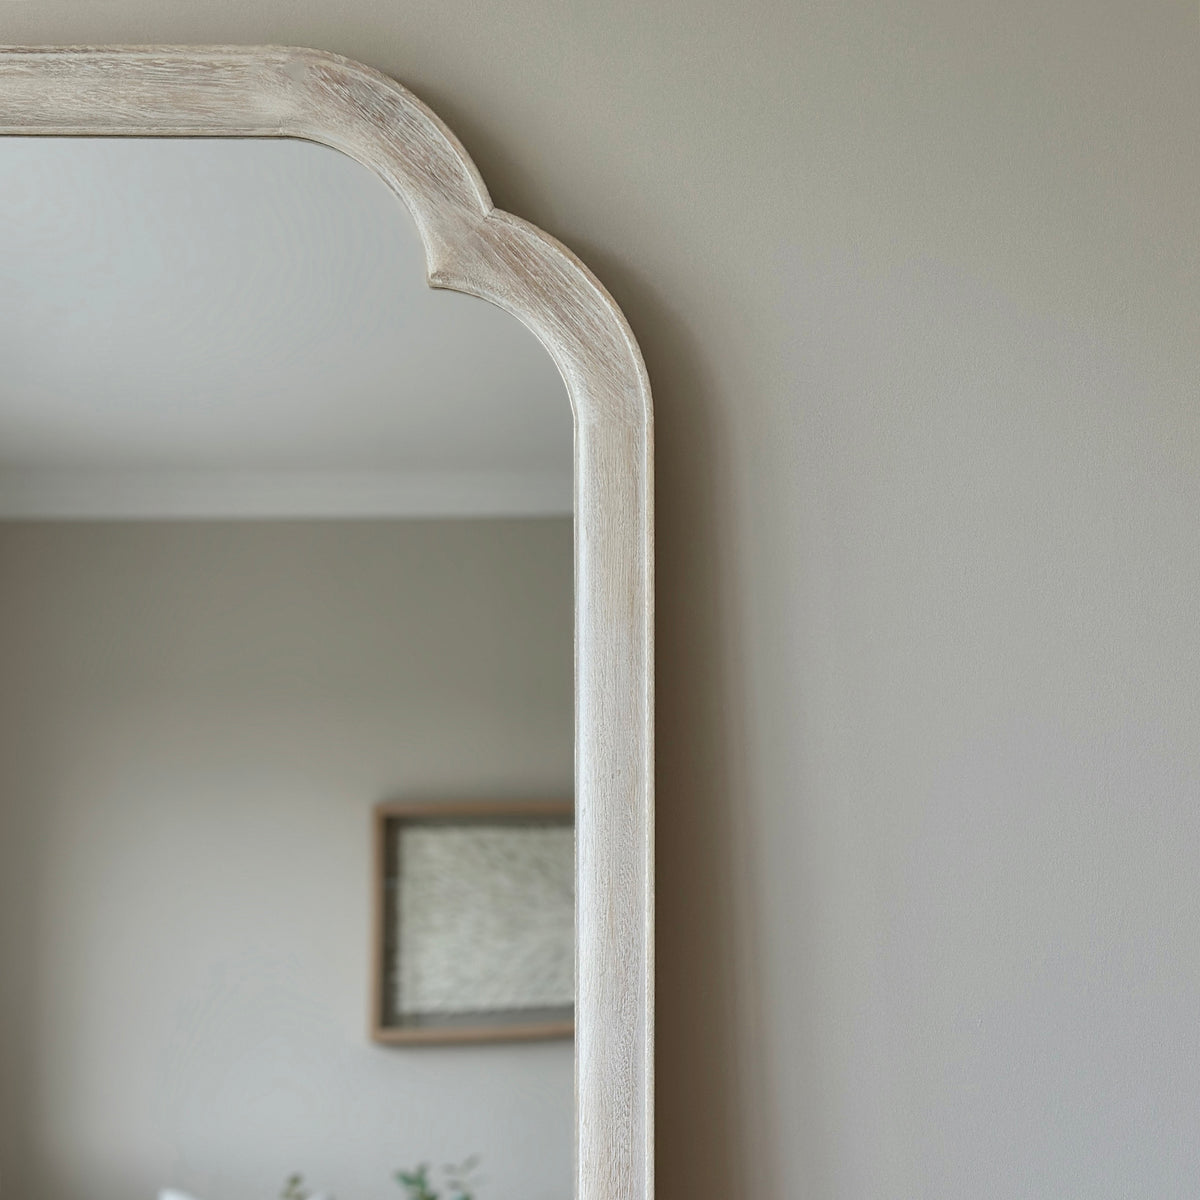 Full Length White Washed Wood Arched Mirror detail shot of arch design